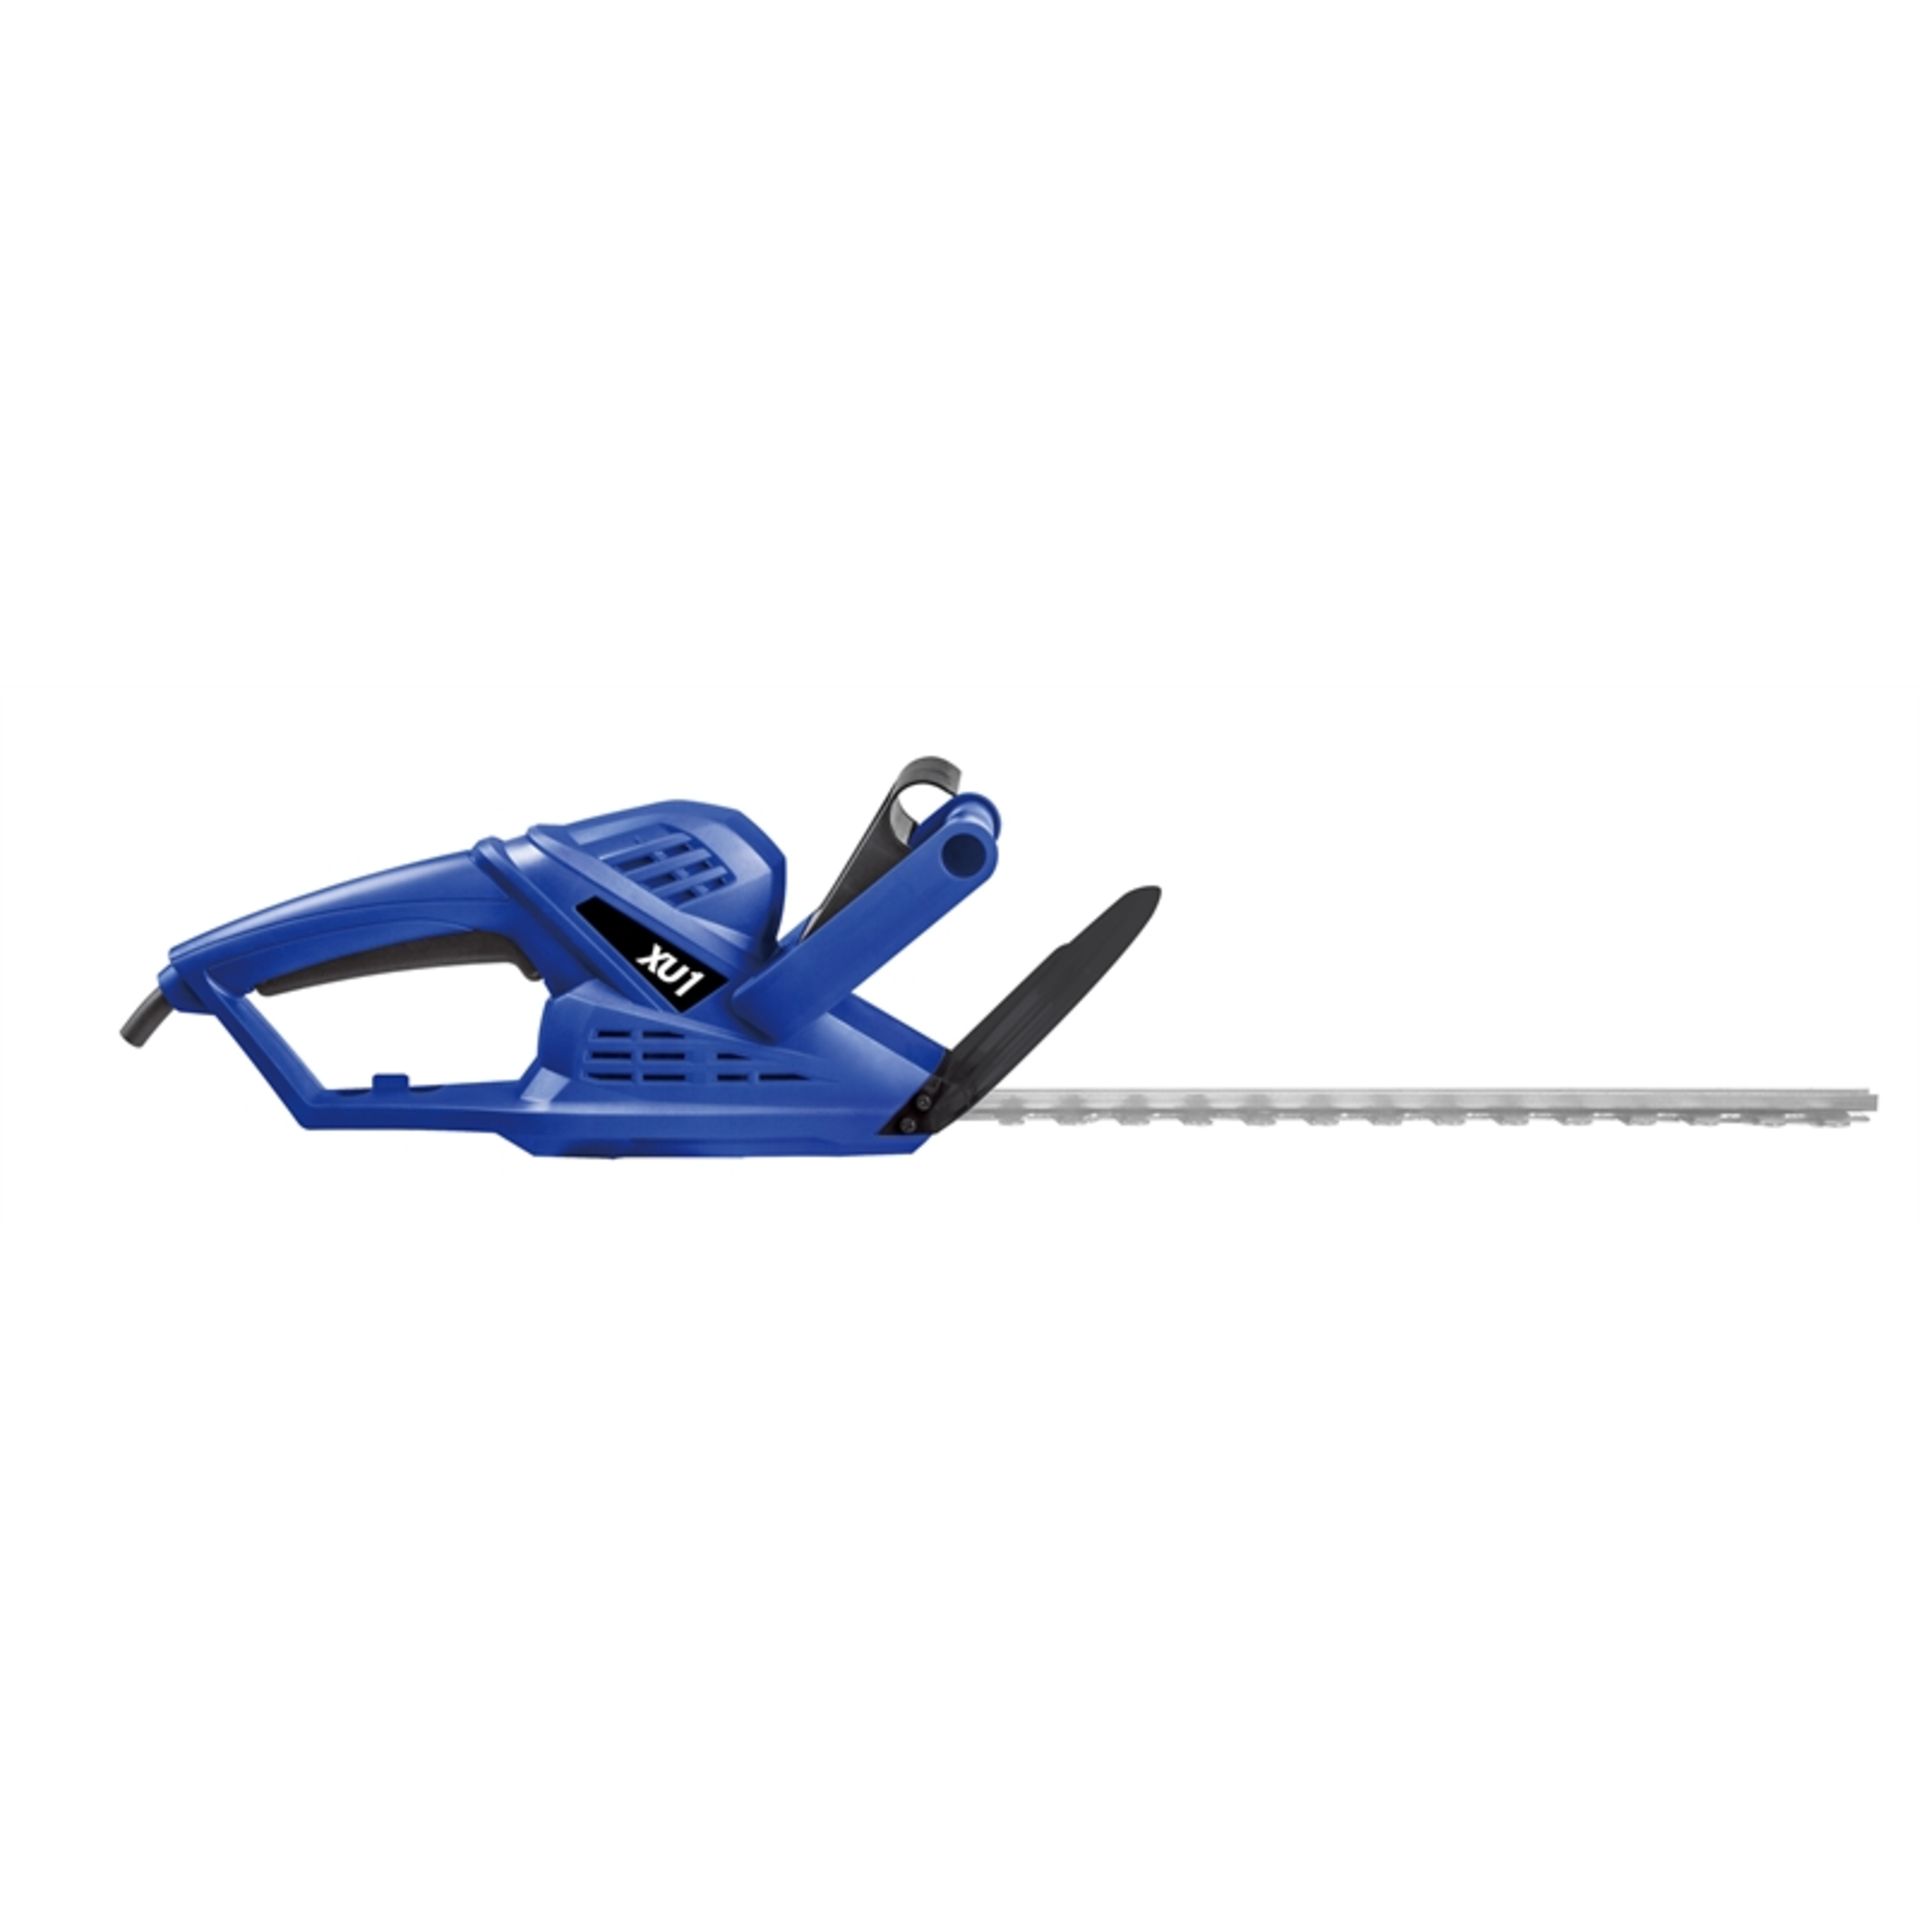 + VAT Brand New rlectric Hedge Trimmer XU1 - 6M Power Cord